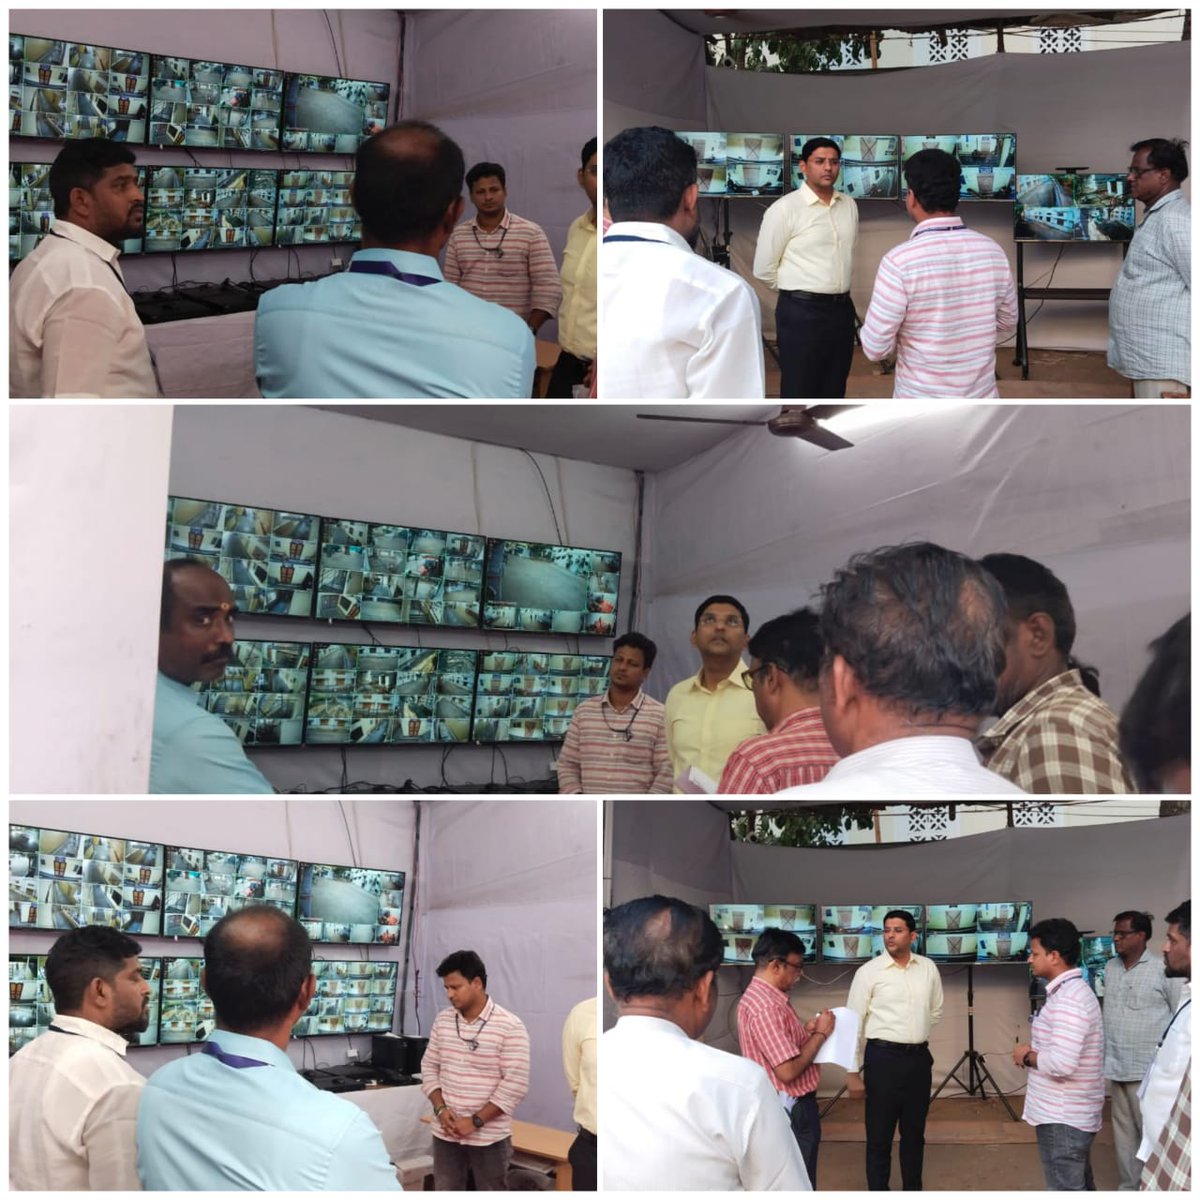 The officials of District Election Office, Chennai conducted inspections at counting centres. RO/RDC Central KJ Praveen inspected the strong room and control unit at the Loyola College counting center in Nungambakkam, Zone 9.

#ChennaiCorporation
#HeretoServe